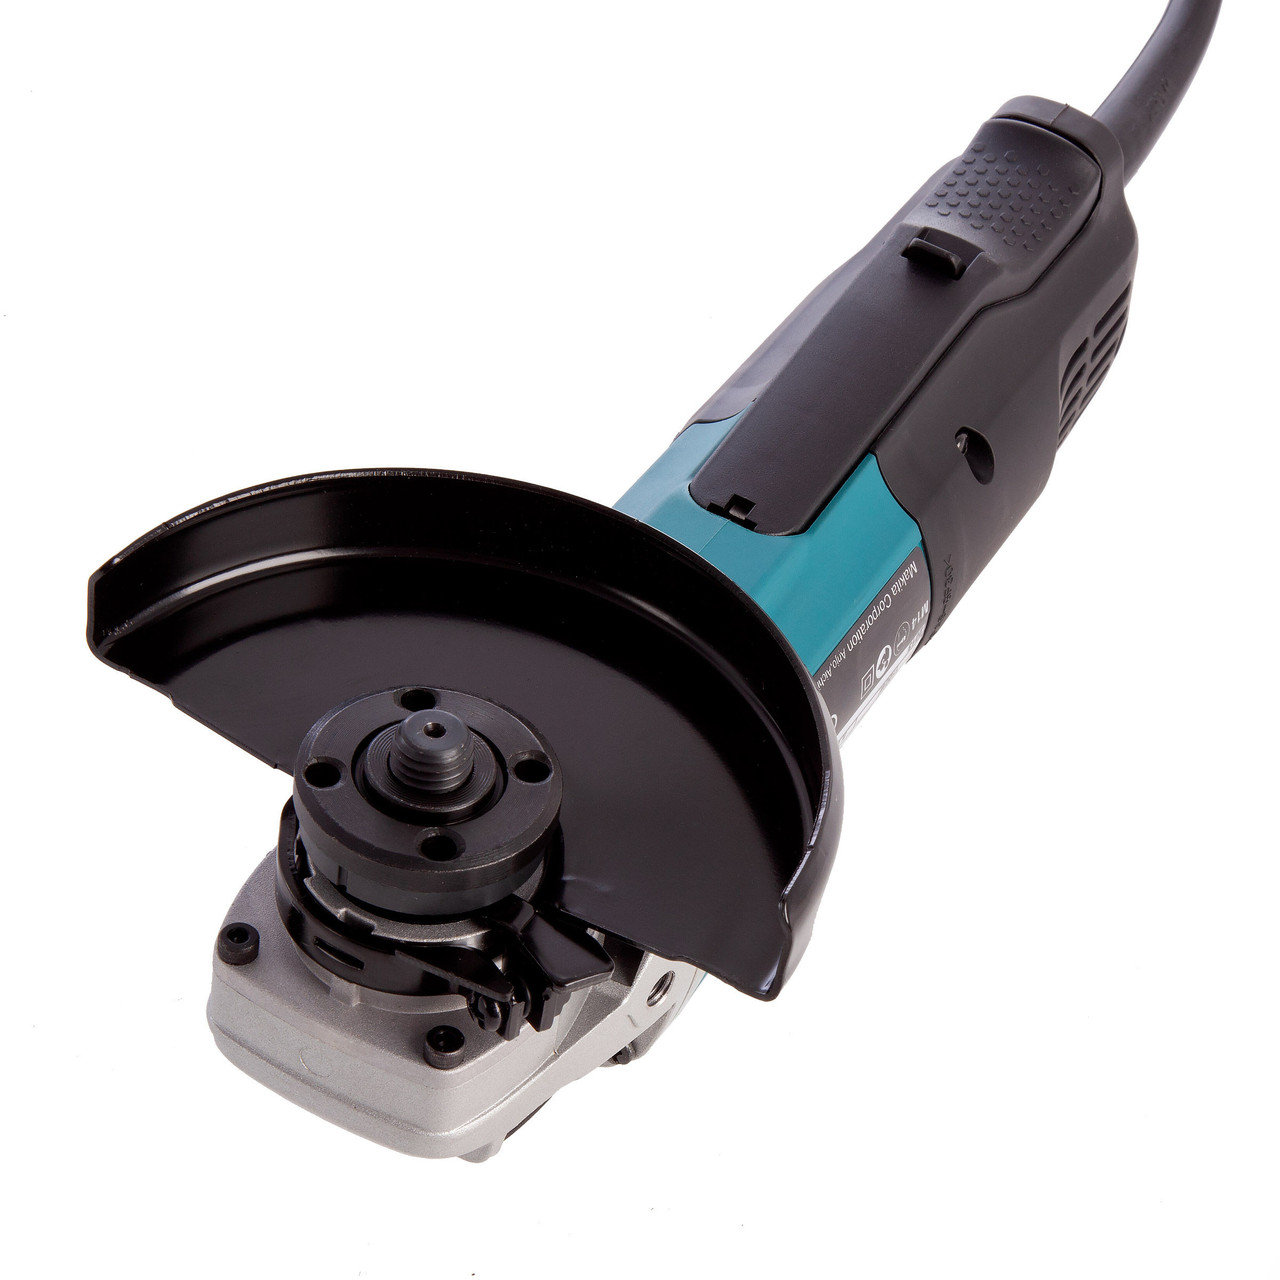 Makita 9565PCV SJS High Power Paddle Switch Angle Grinder, 5